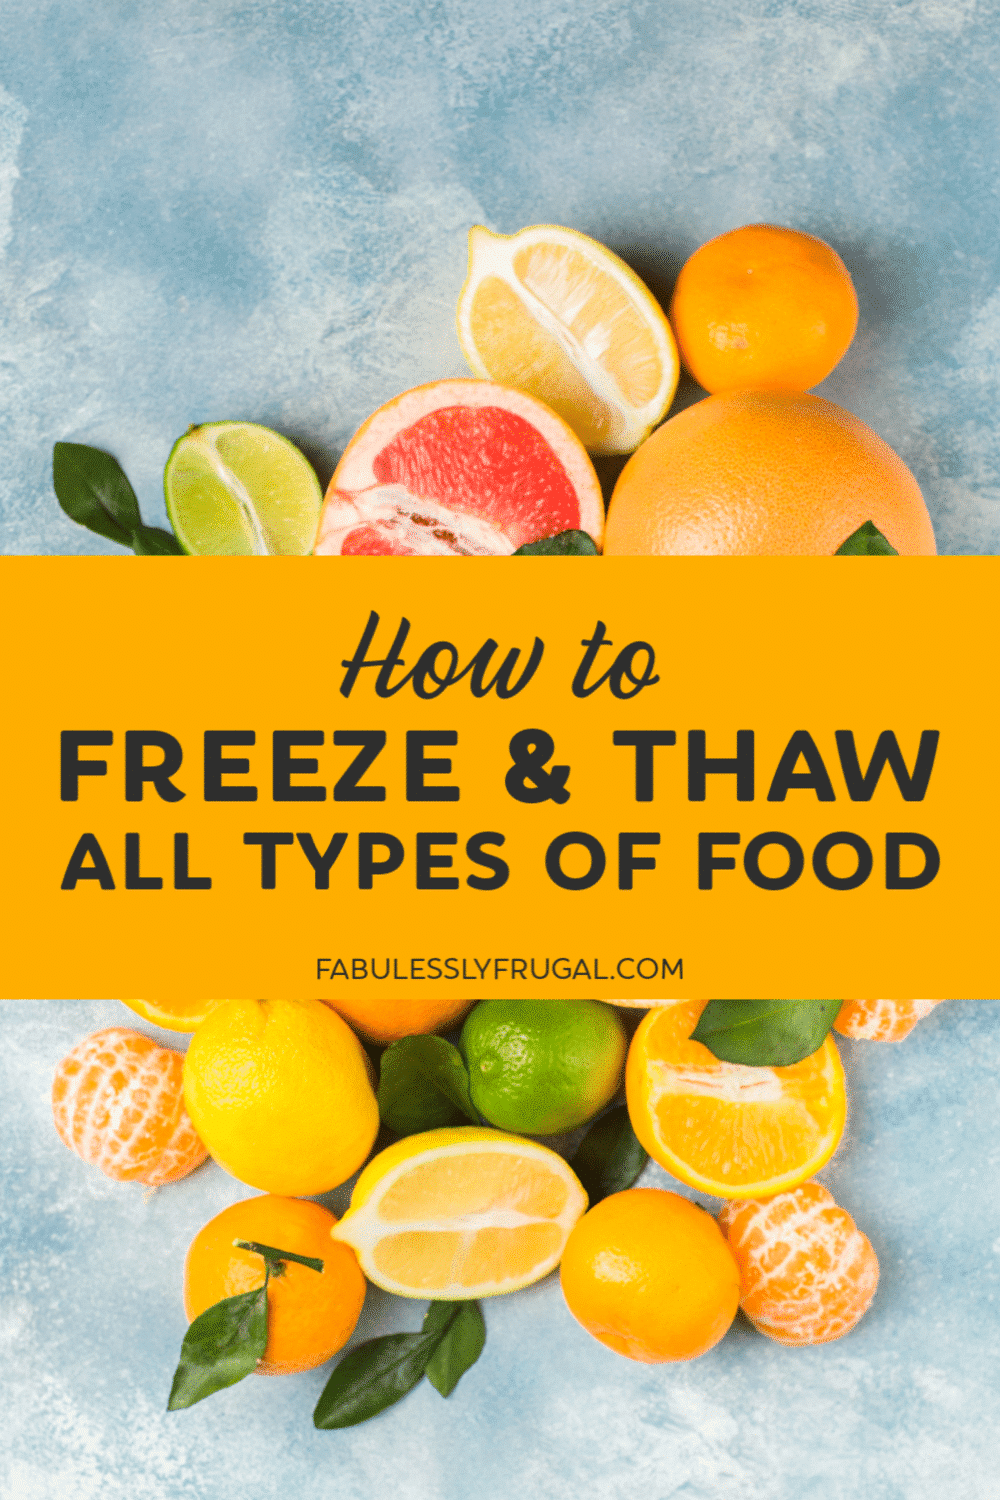 How to freeze foods